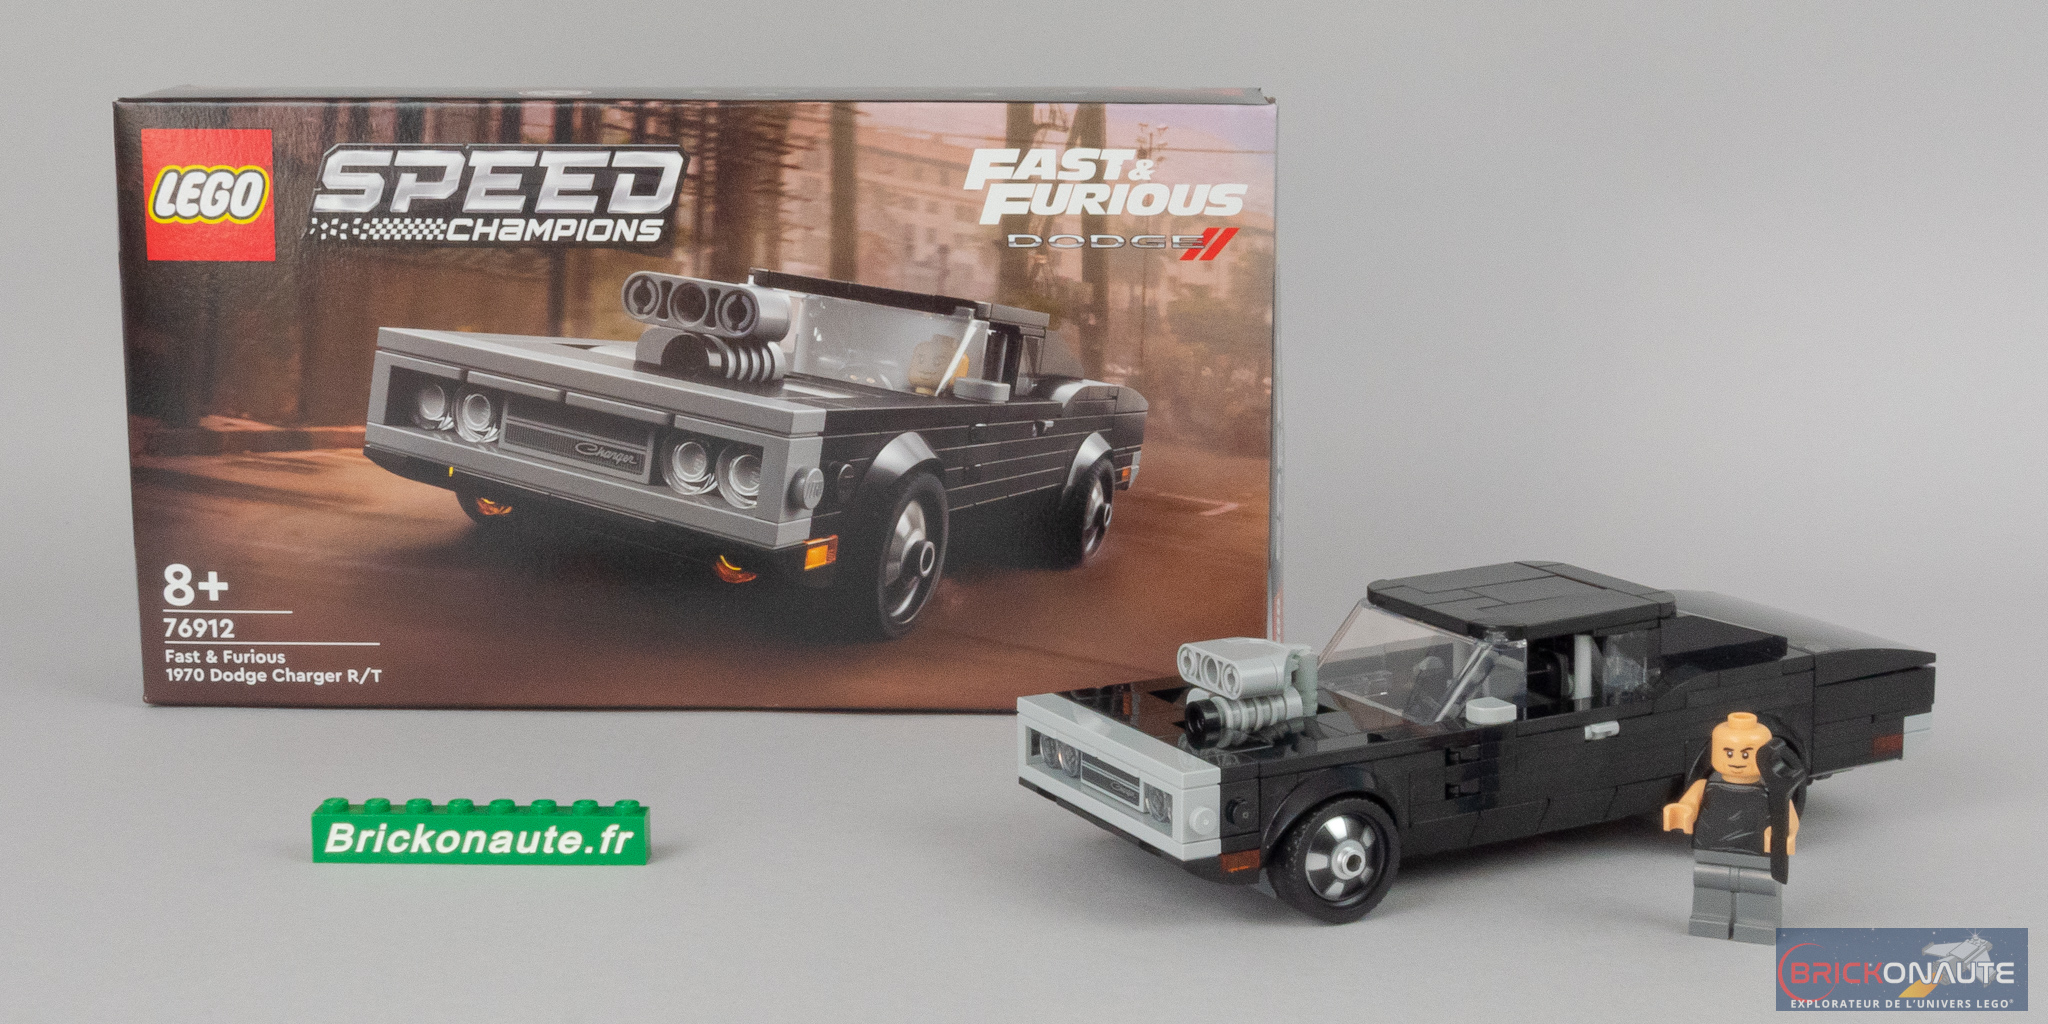 Fast & Furious 1970 Dodge Charger R/T (LEGO Speed Champions - 76912) -  Mini-review - Brickonaute